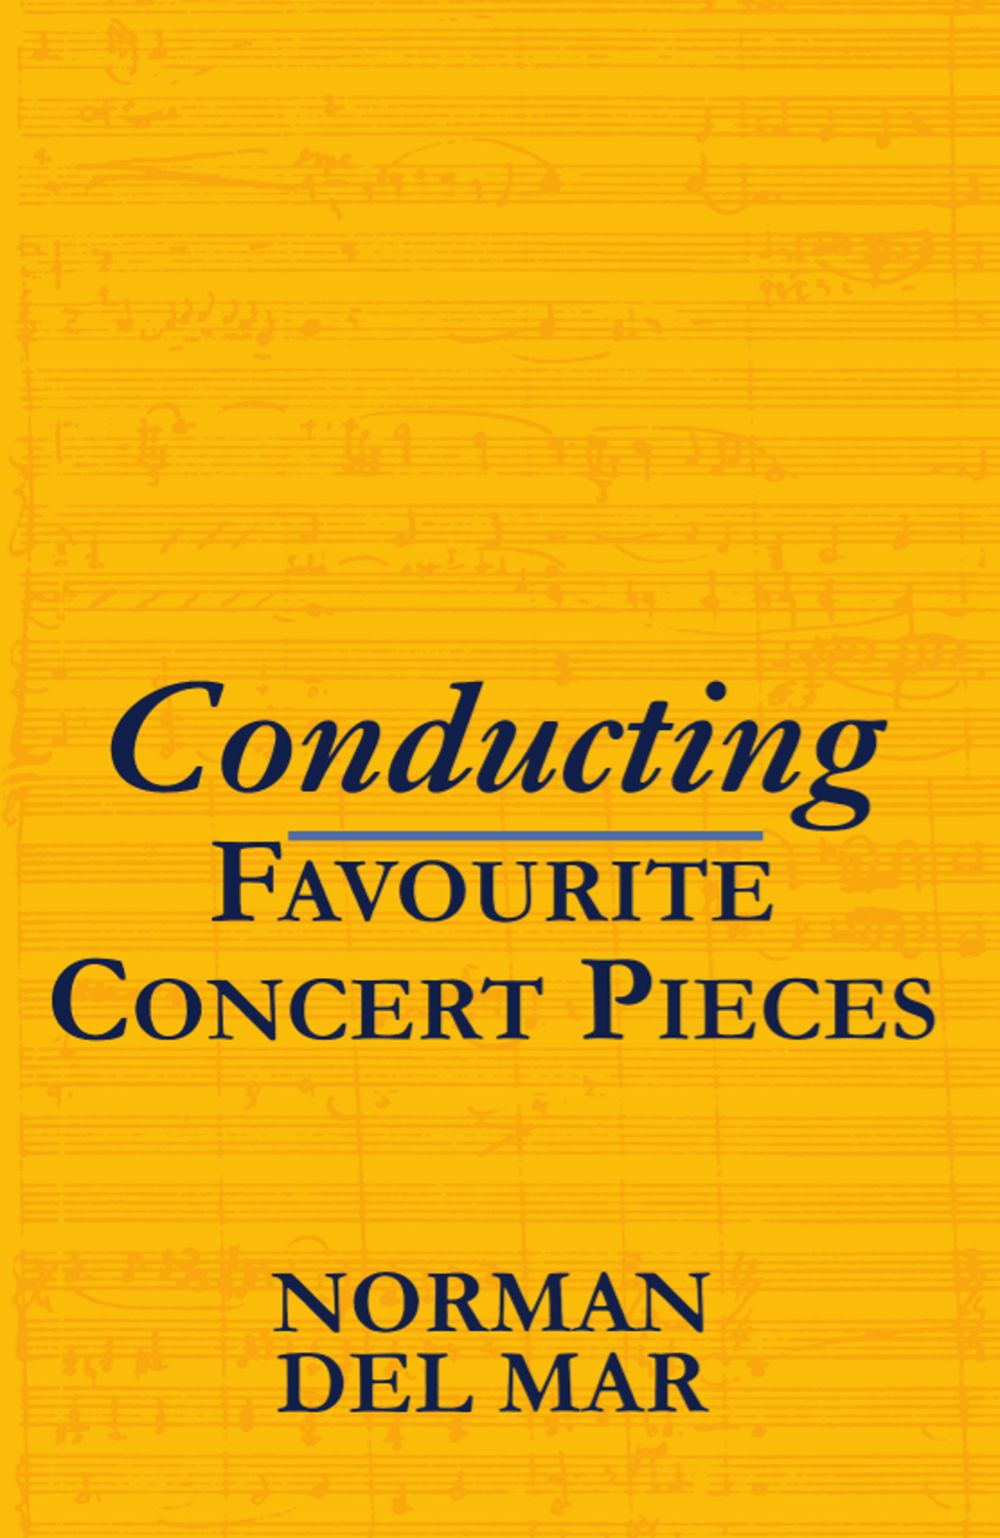 Del Mar Conducting Favourite Concert Pieces Pb Sheet Music Songbook